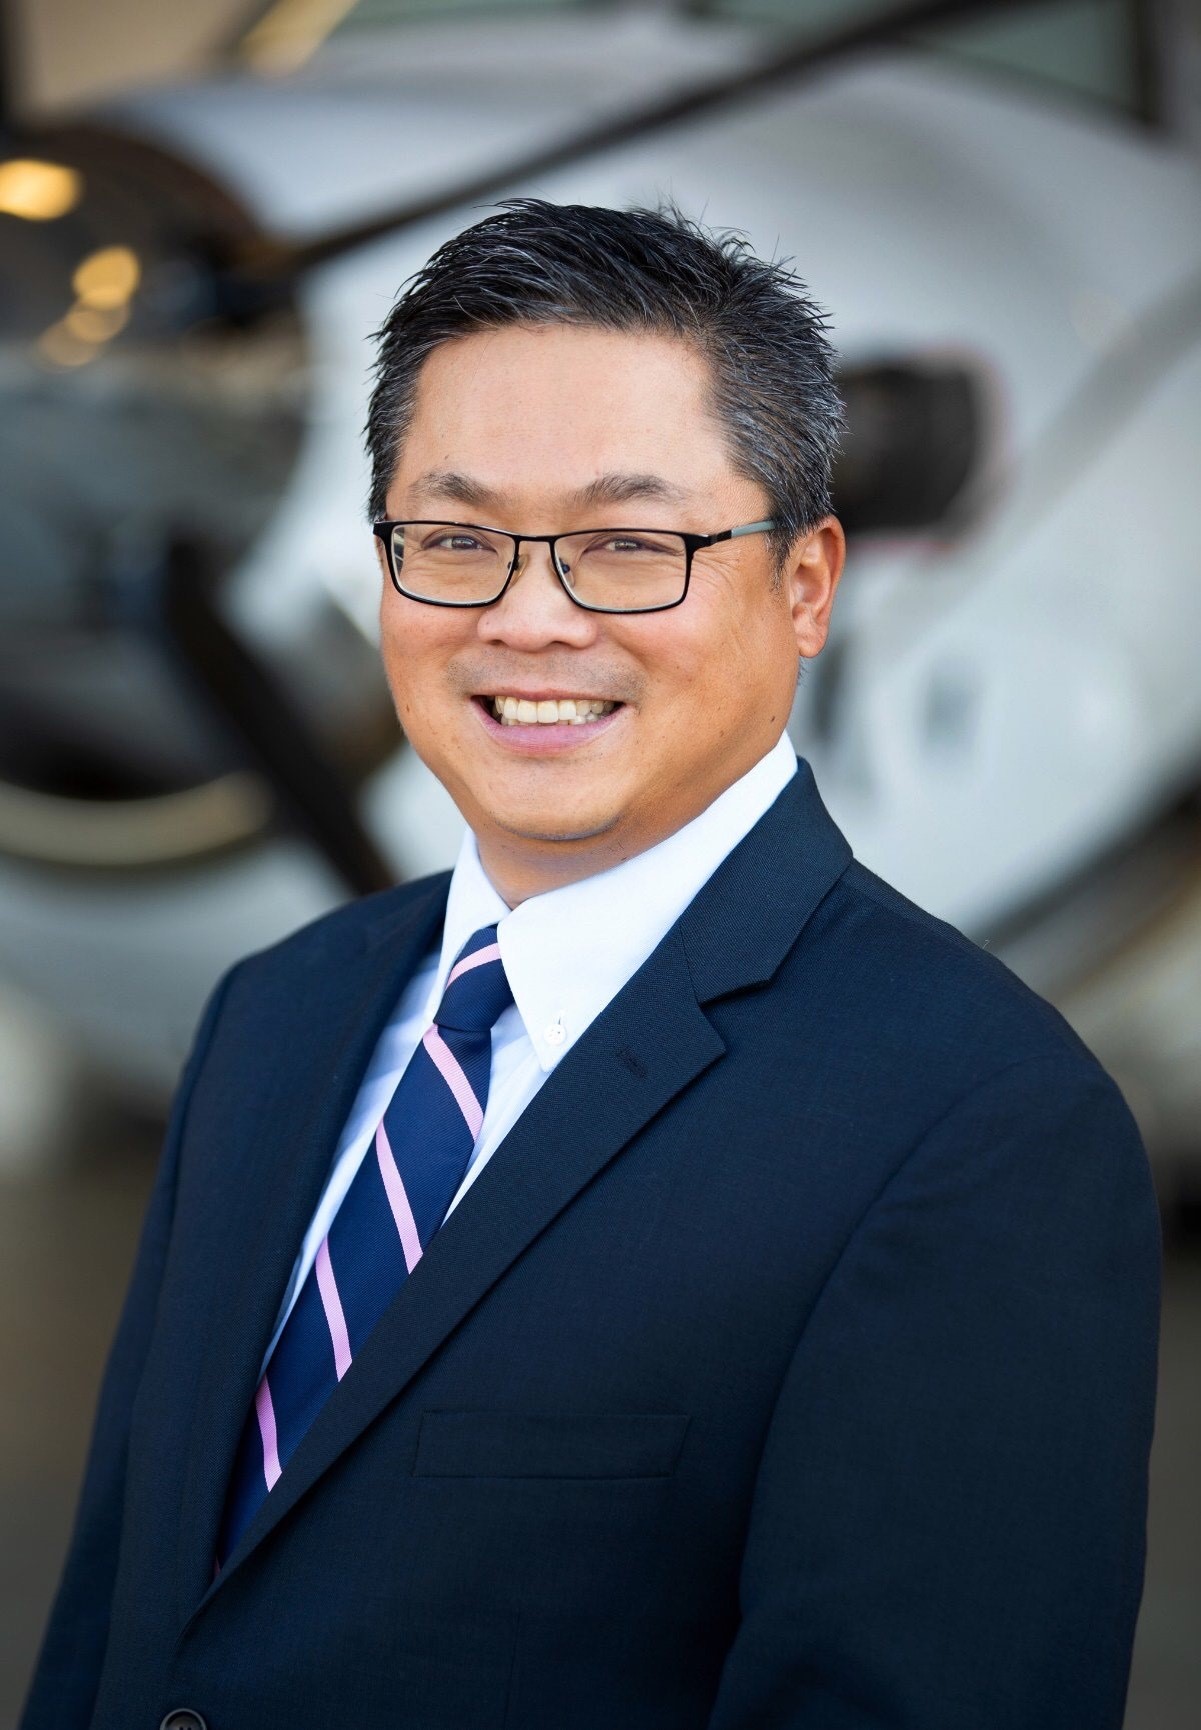 Daniel Cheung, CPA co-founded Aviation Tax Consultants, LLC in 2003